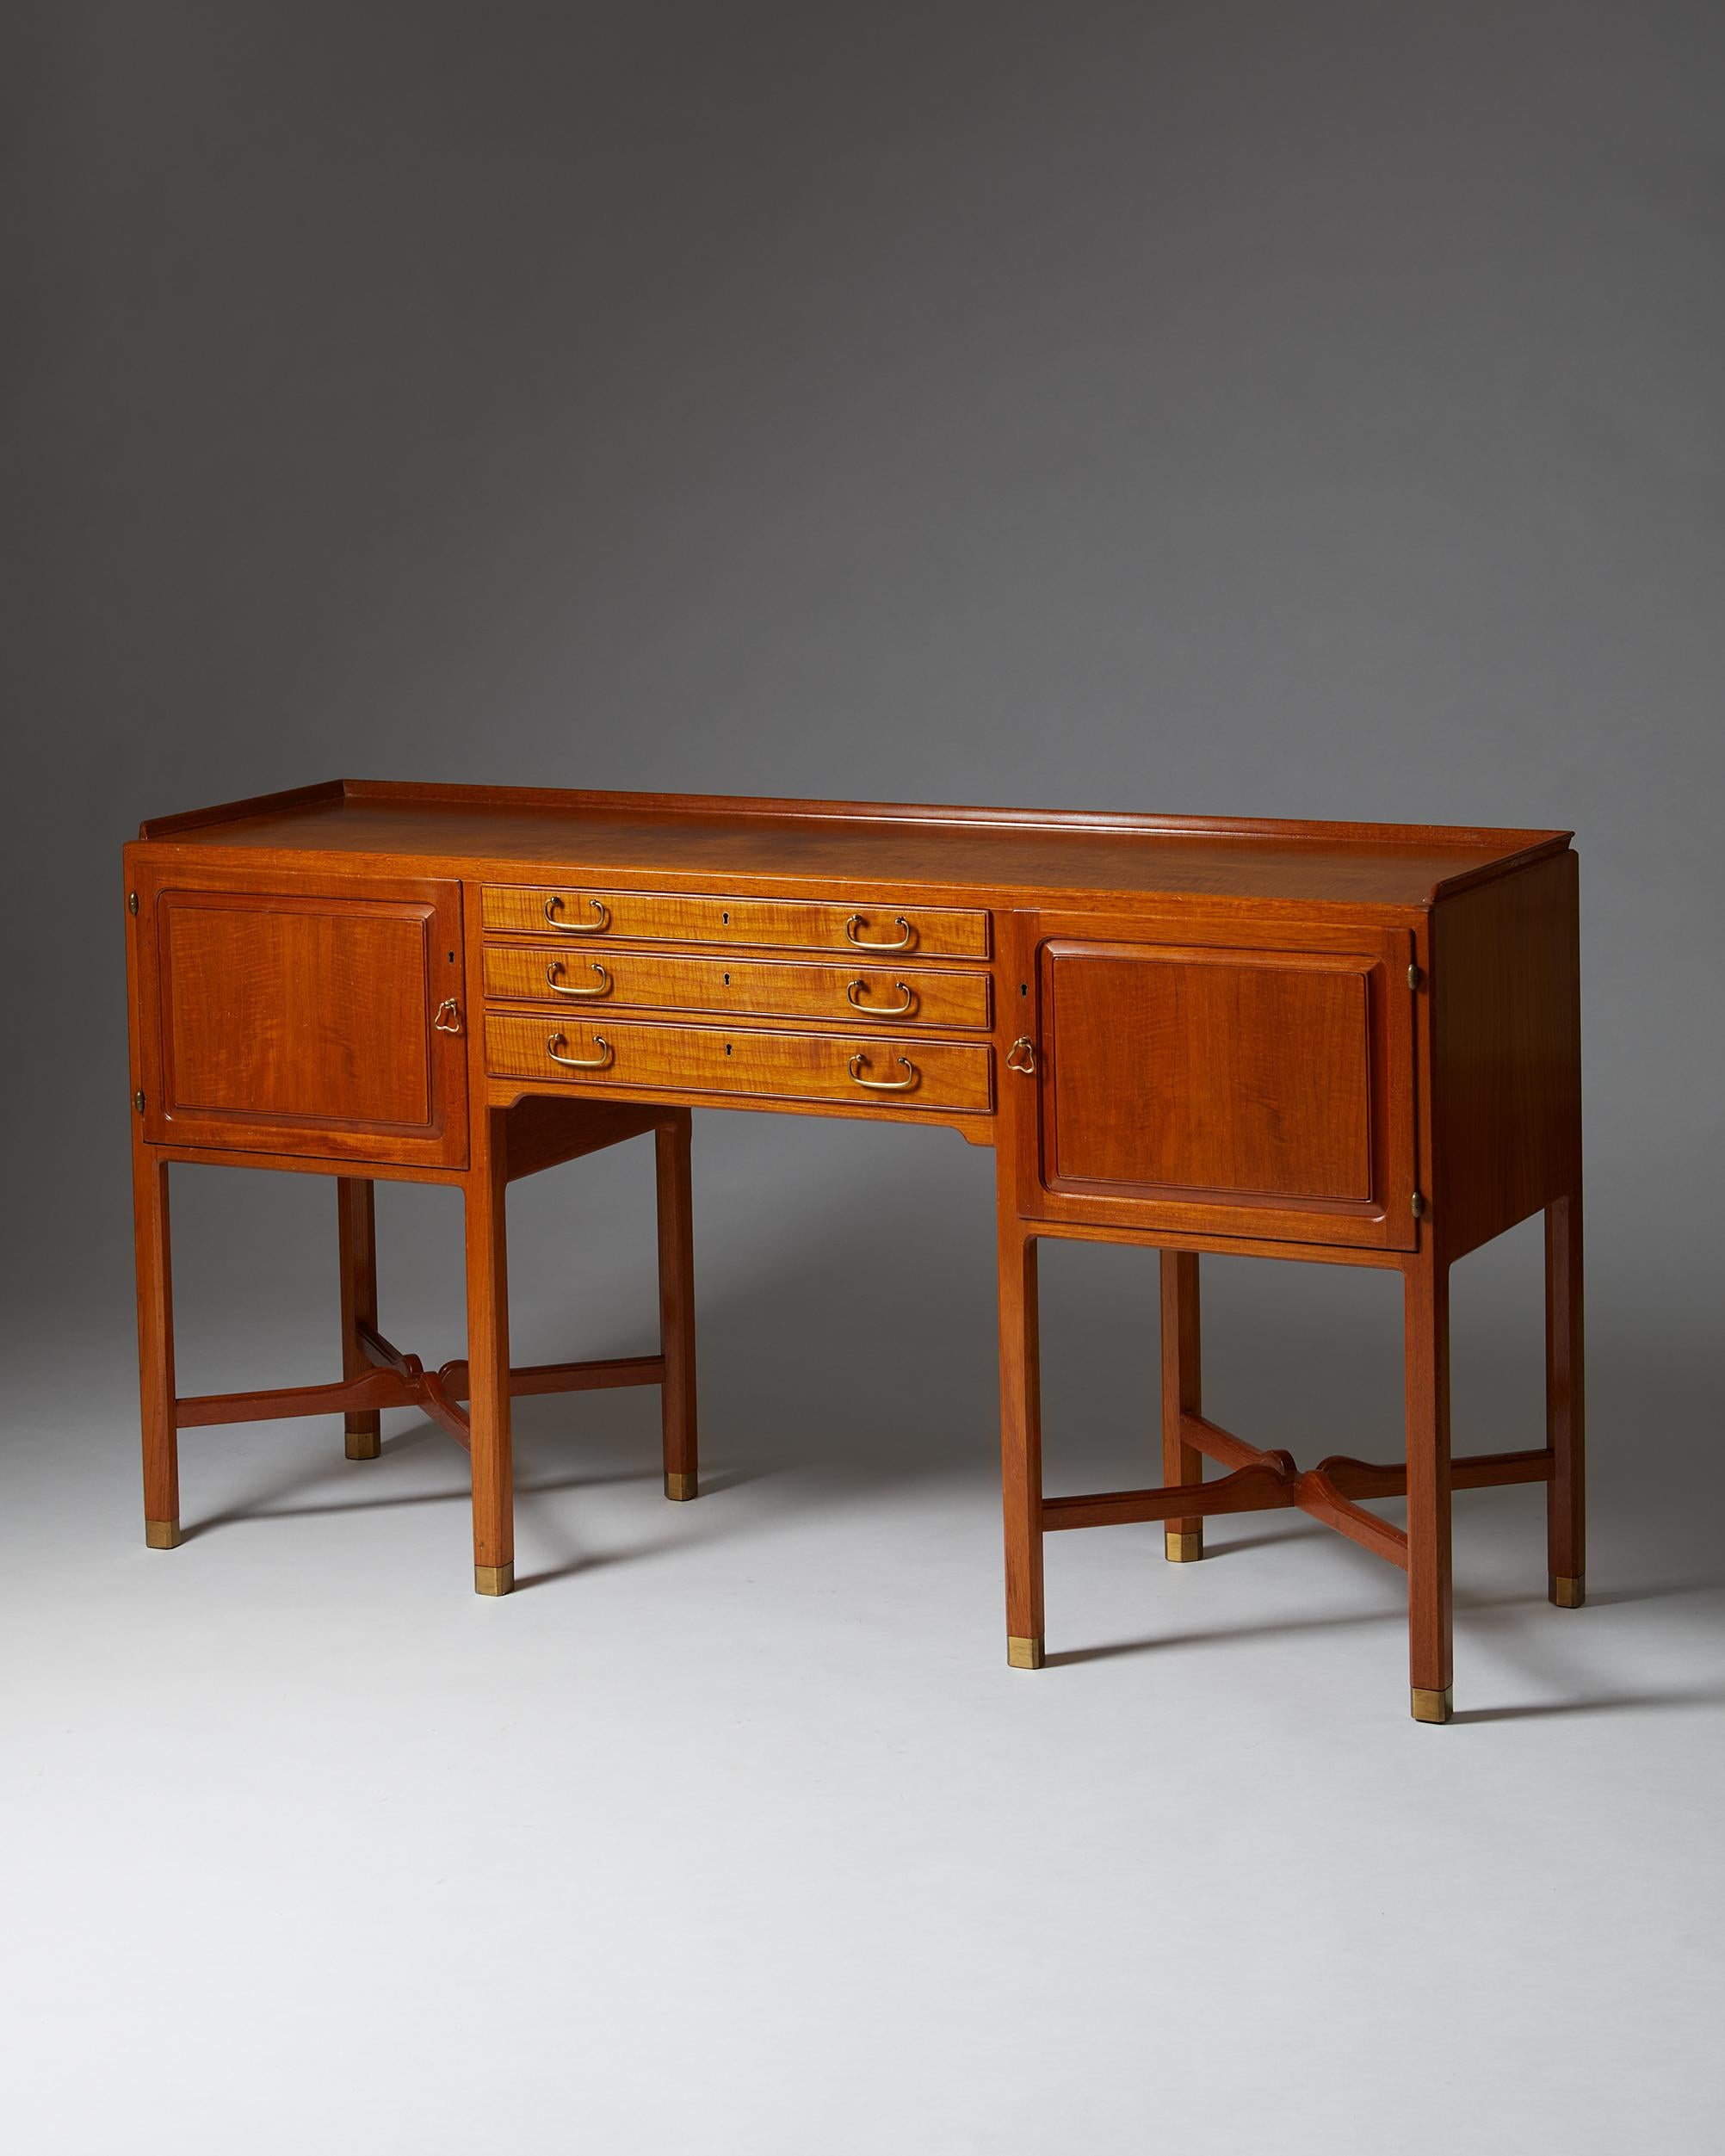 Sideboard, anonymous, for Nordiska Kompaniet,
Sweden, 1948.
Mahogany and brass.

Marked with label NK R46729 C 7 1 48

Measures: H 85.5 cm/ 2'10 1/8